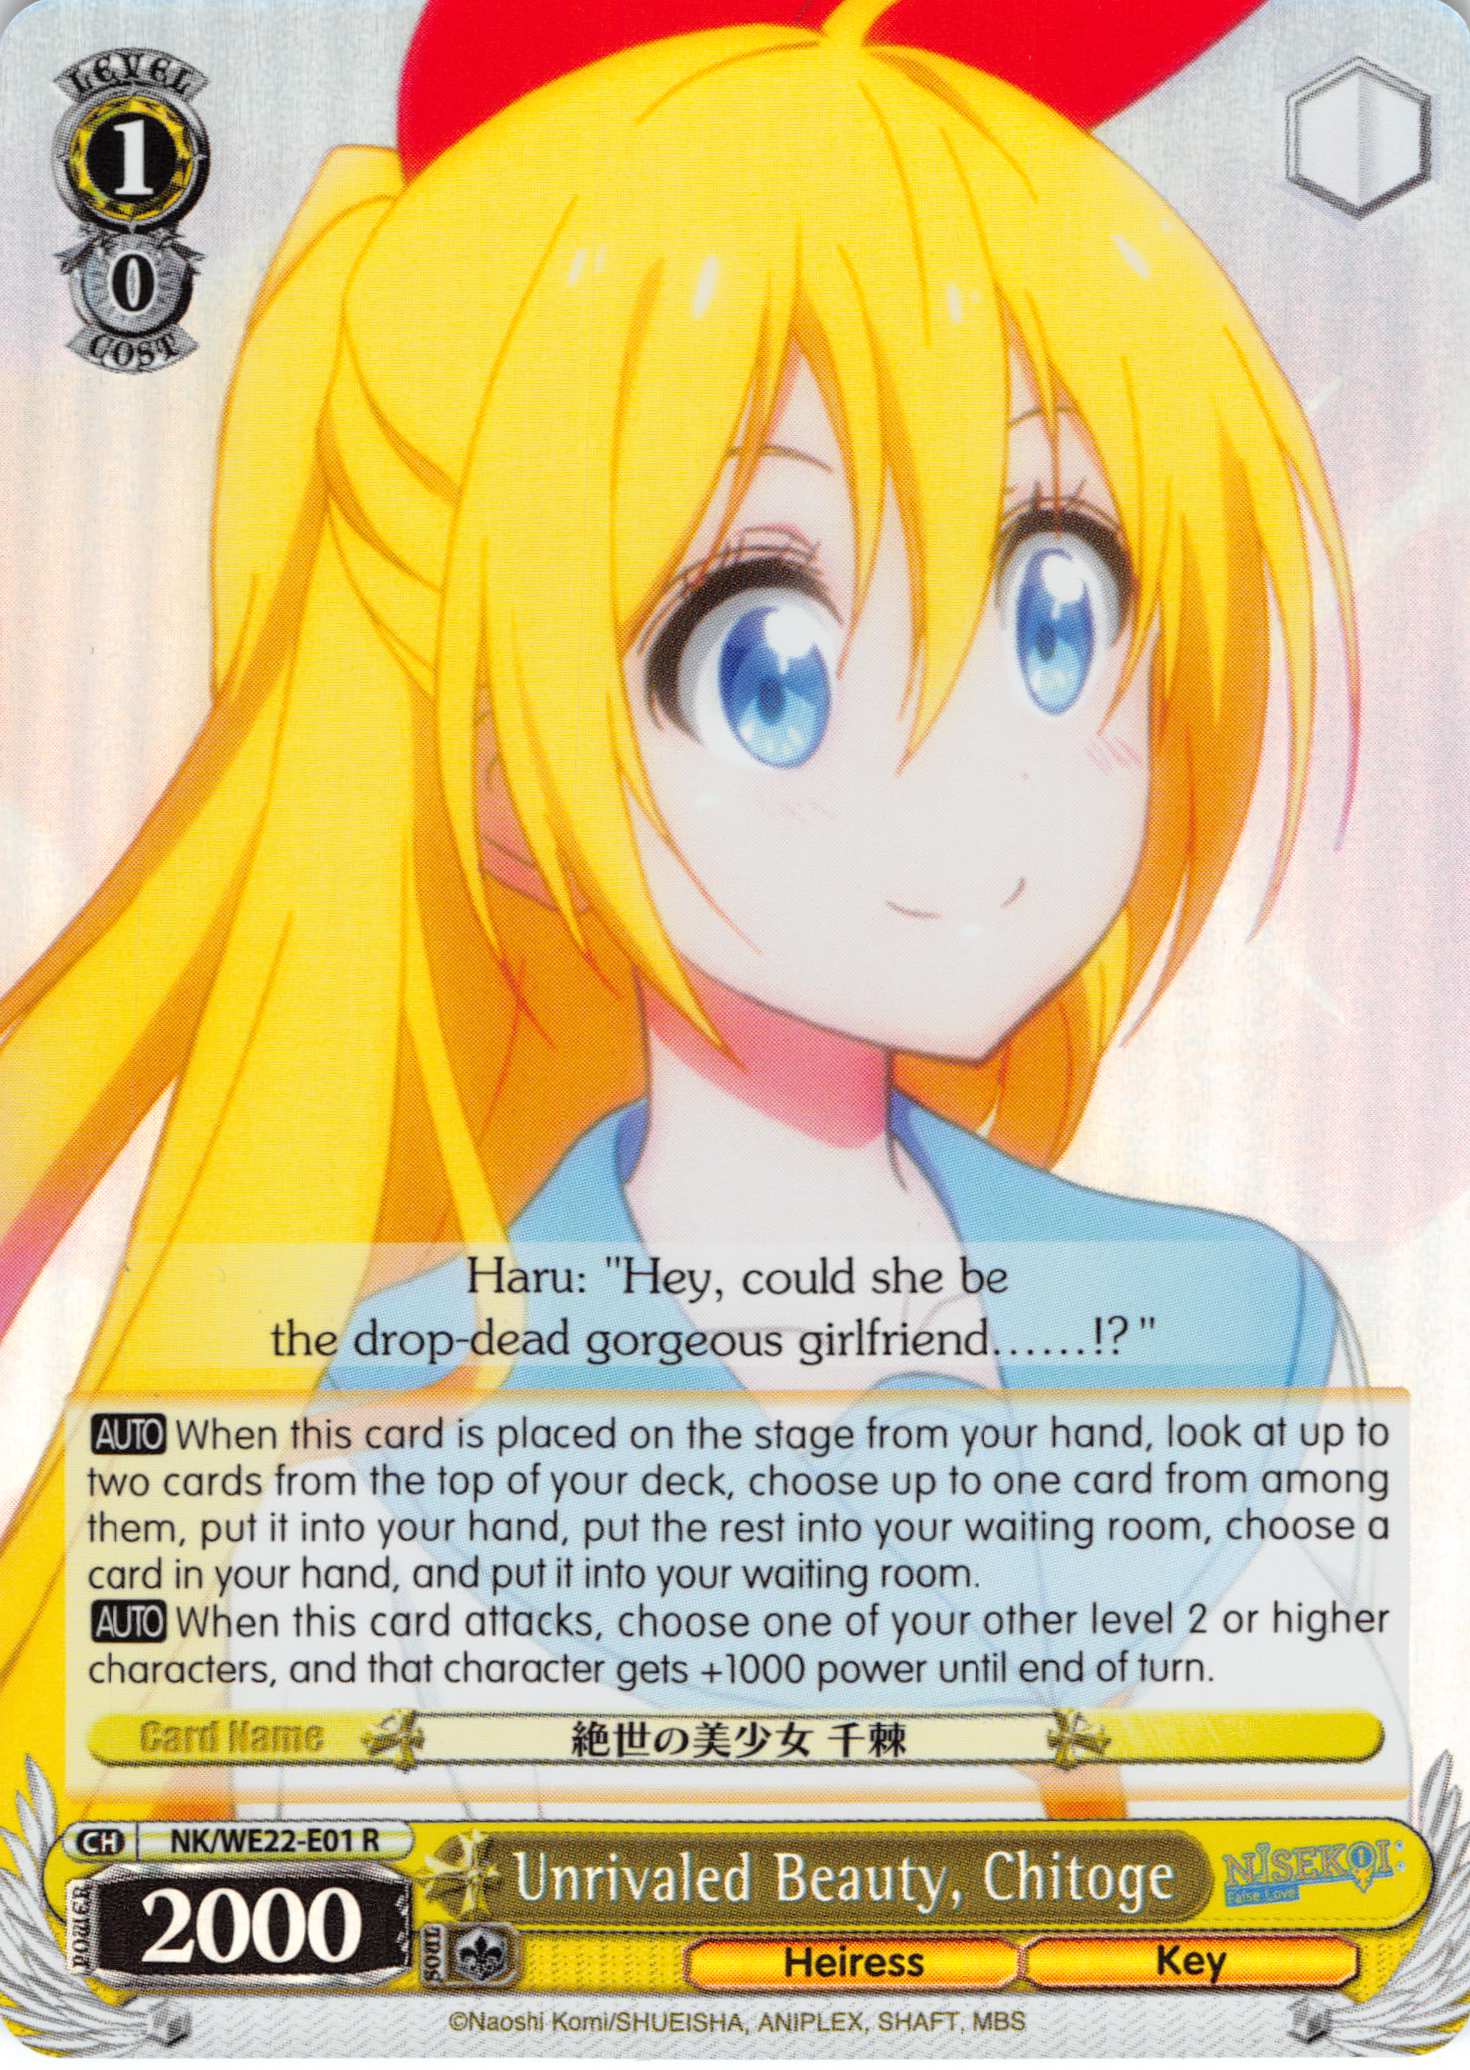 Unrivaled Beauty, Chitoge (NK/WE22-E01) (Parallel Foil) [NISEKOI Extra Booster]